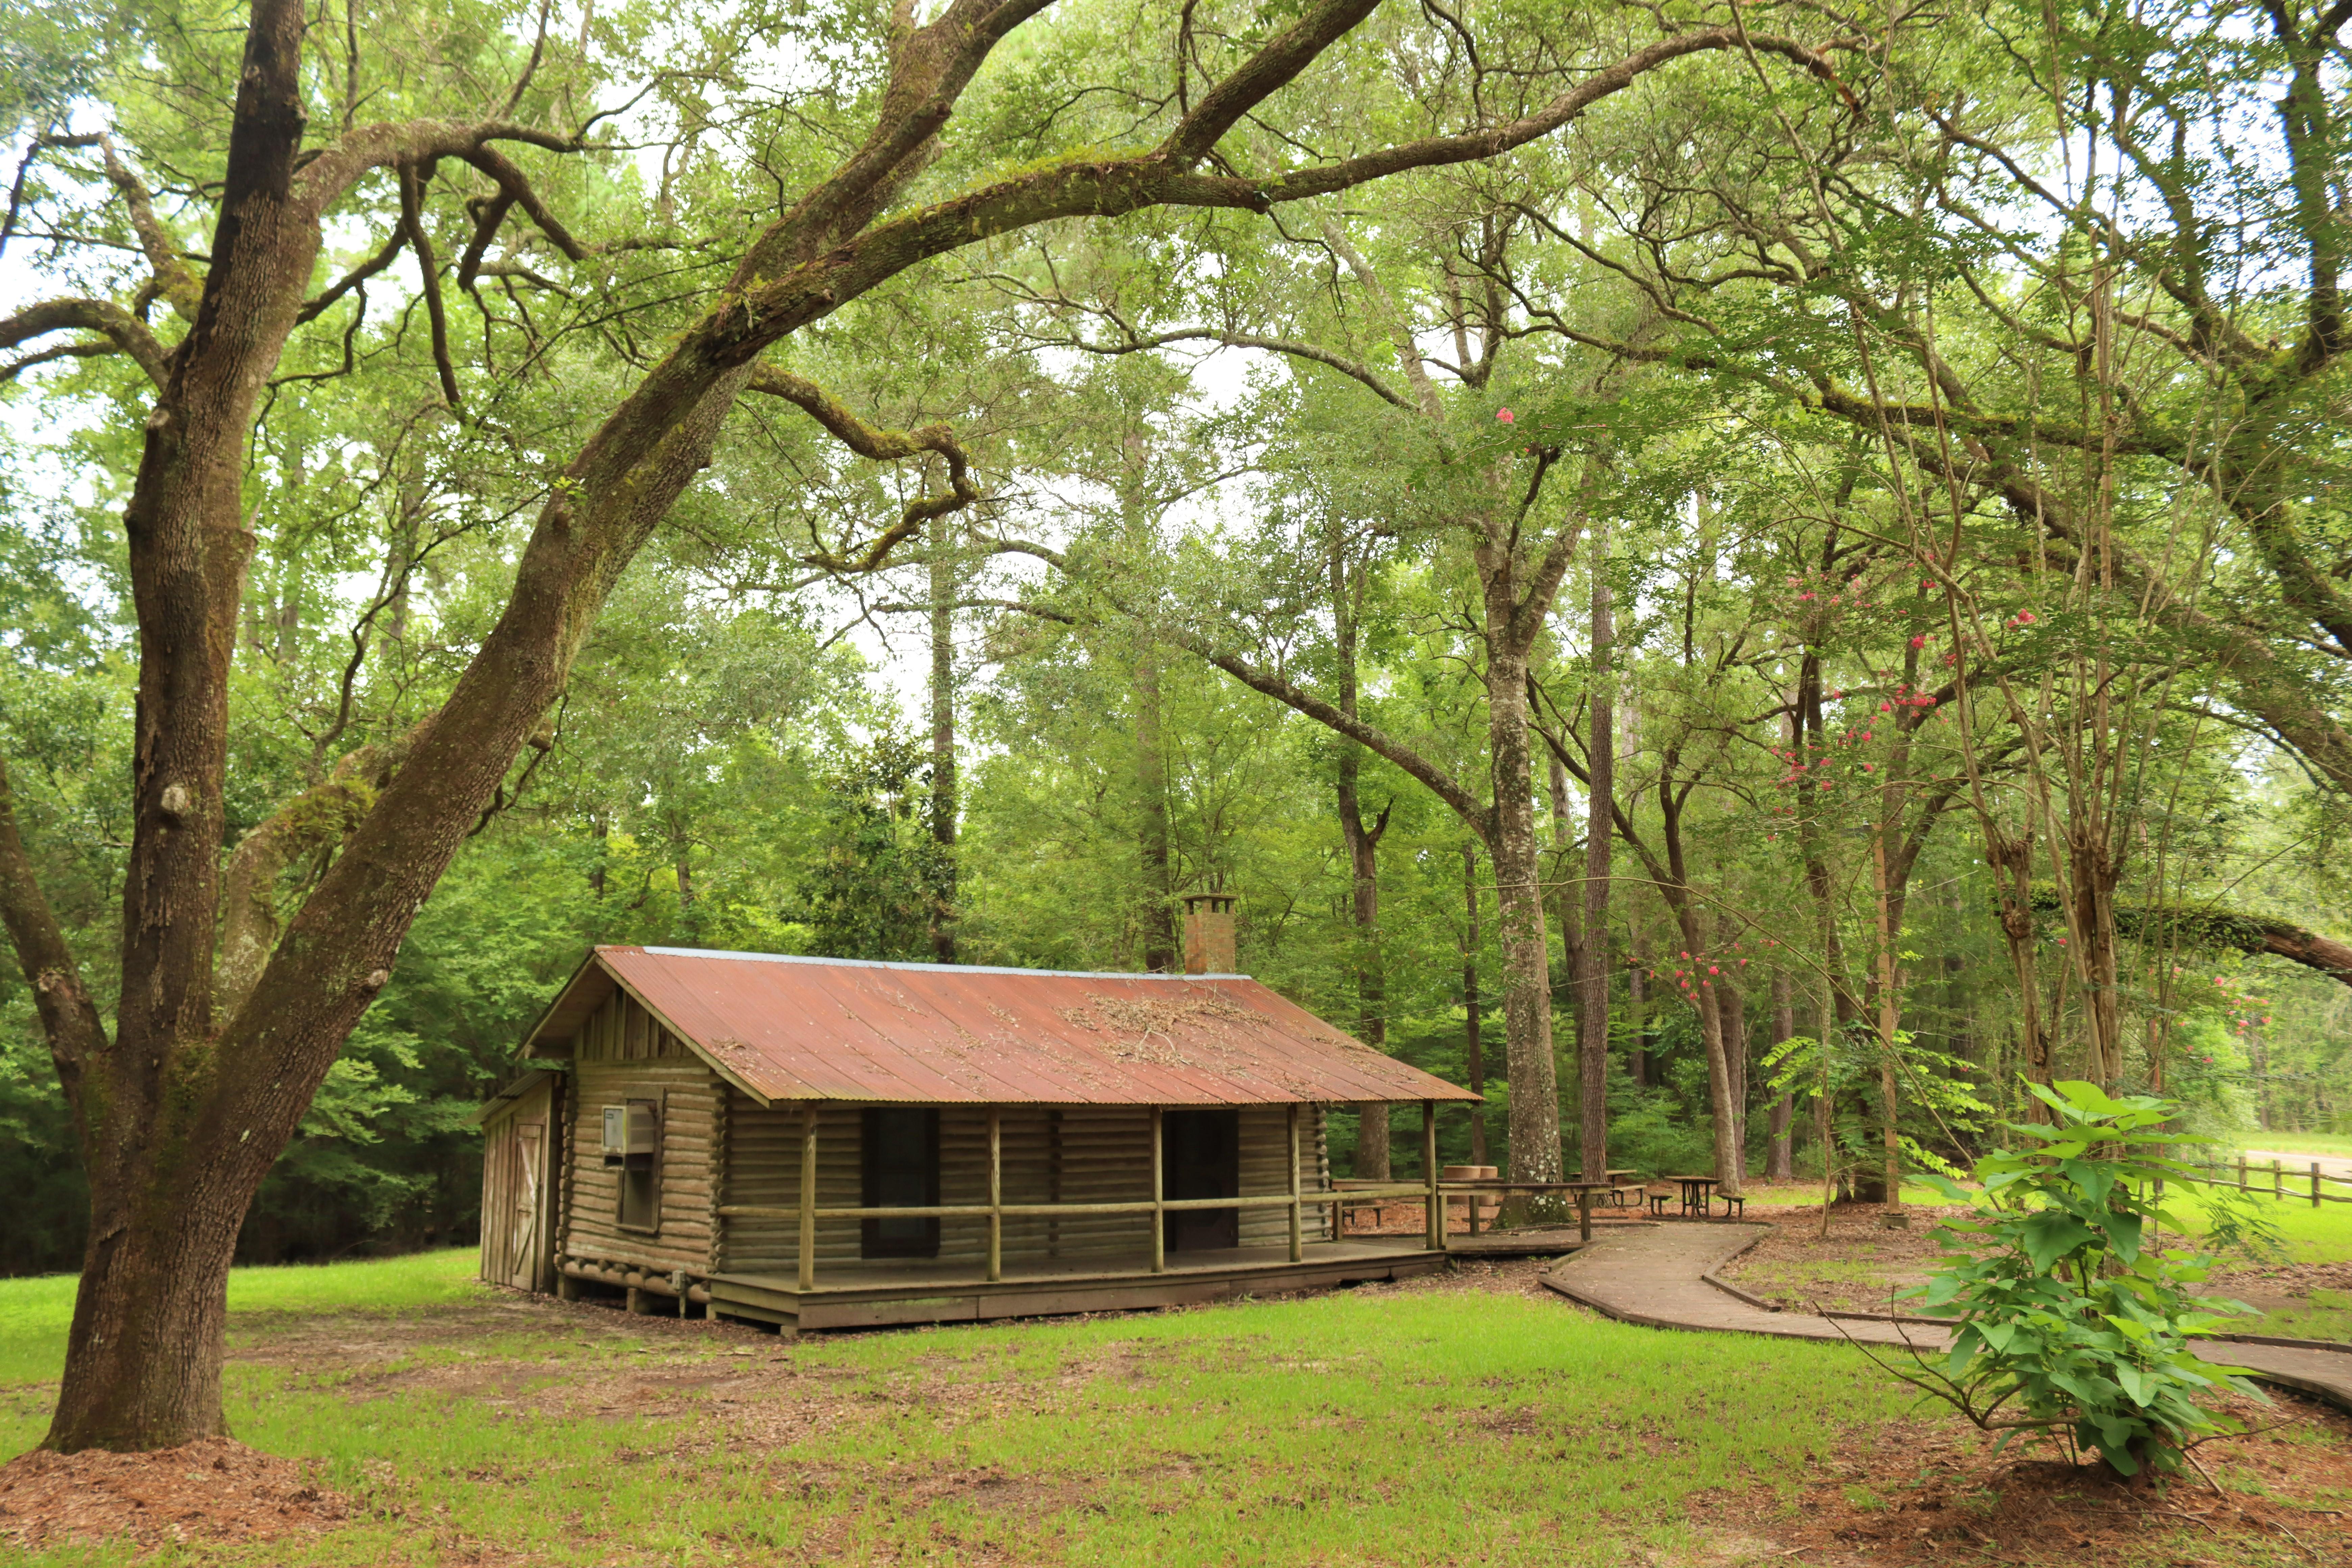 A log cabin in a forest beneath a canopy of sprawling live oak trees.